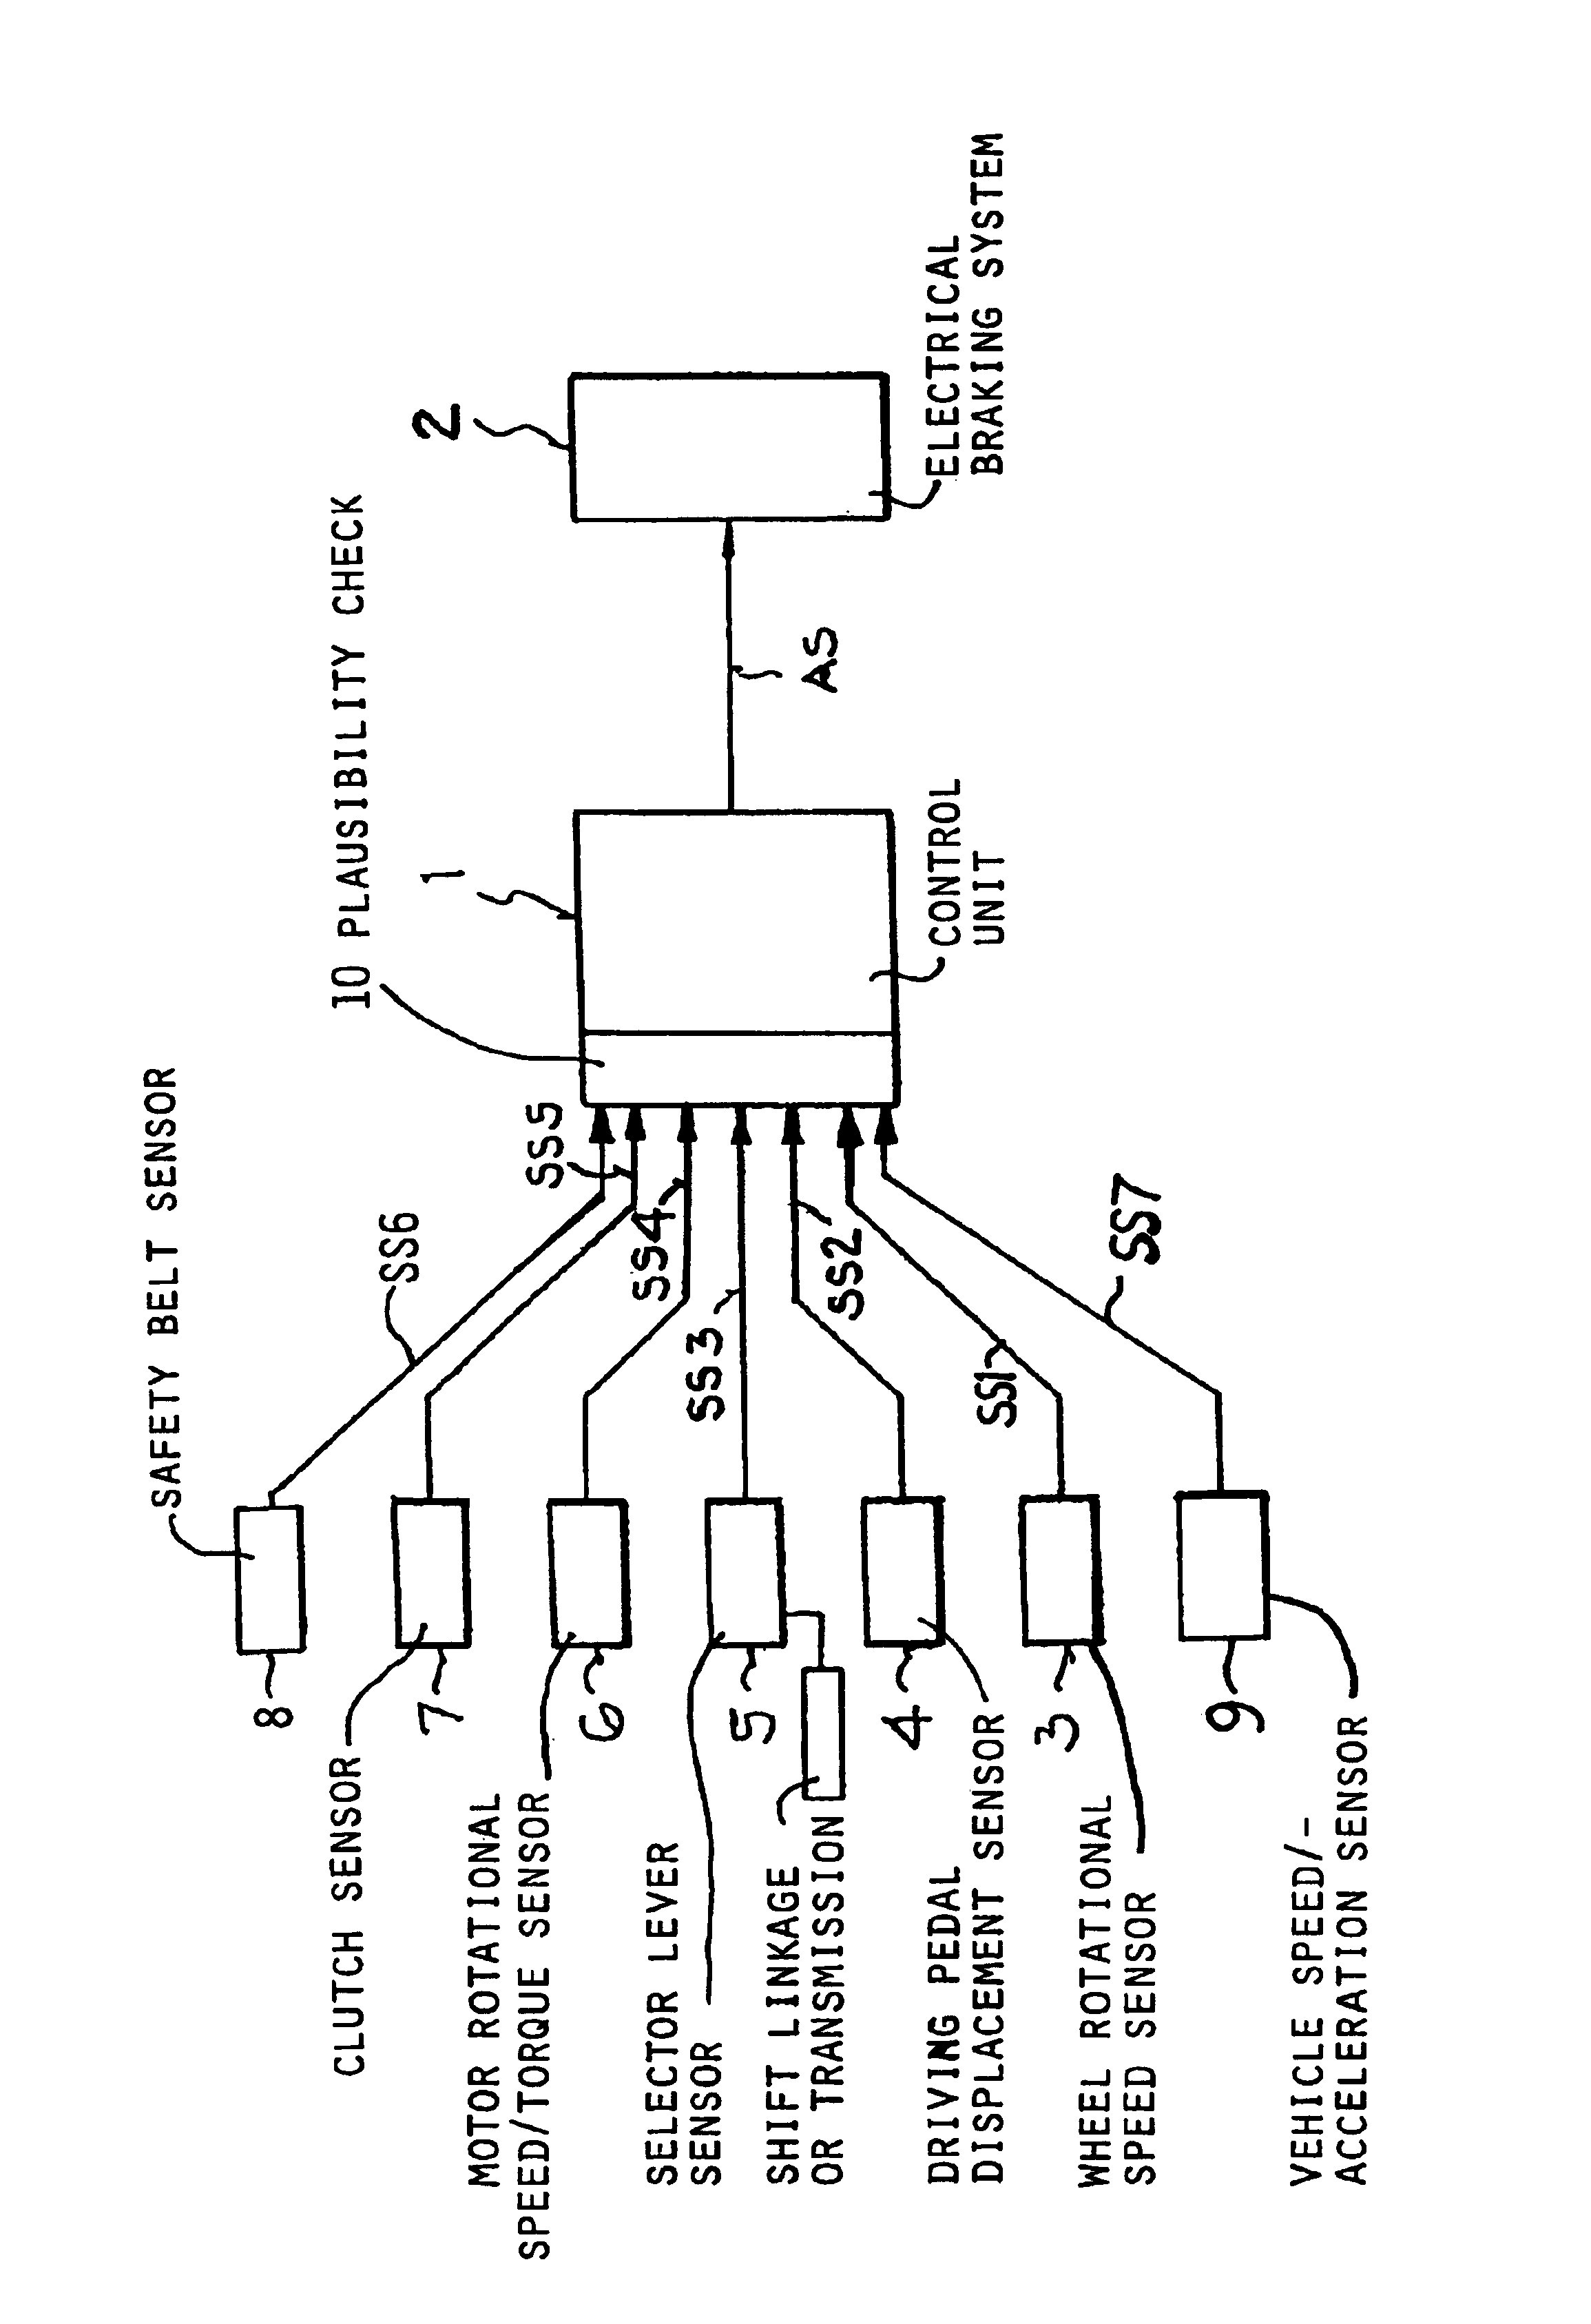 Method for operating a motor-driven vehicle